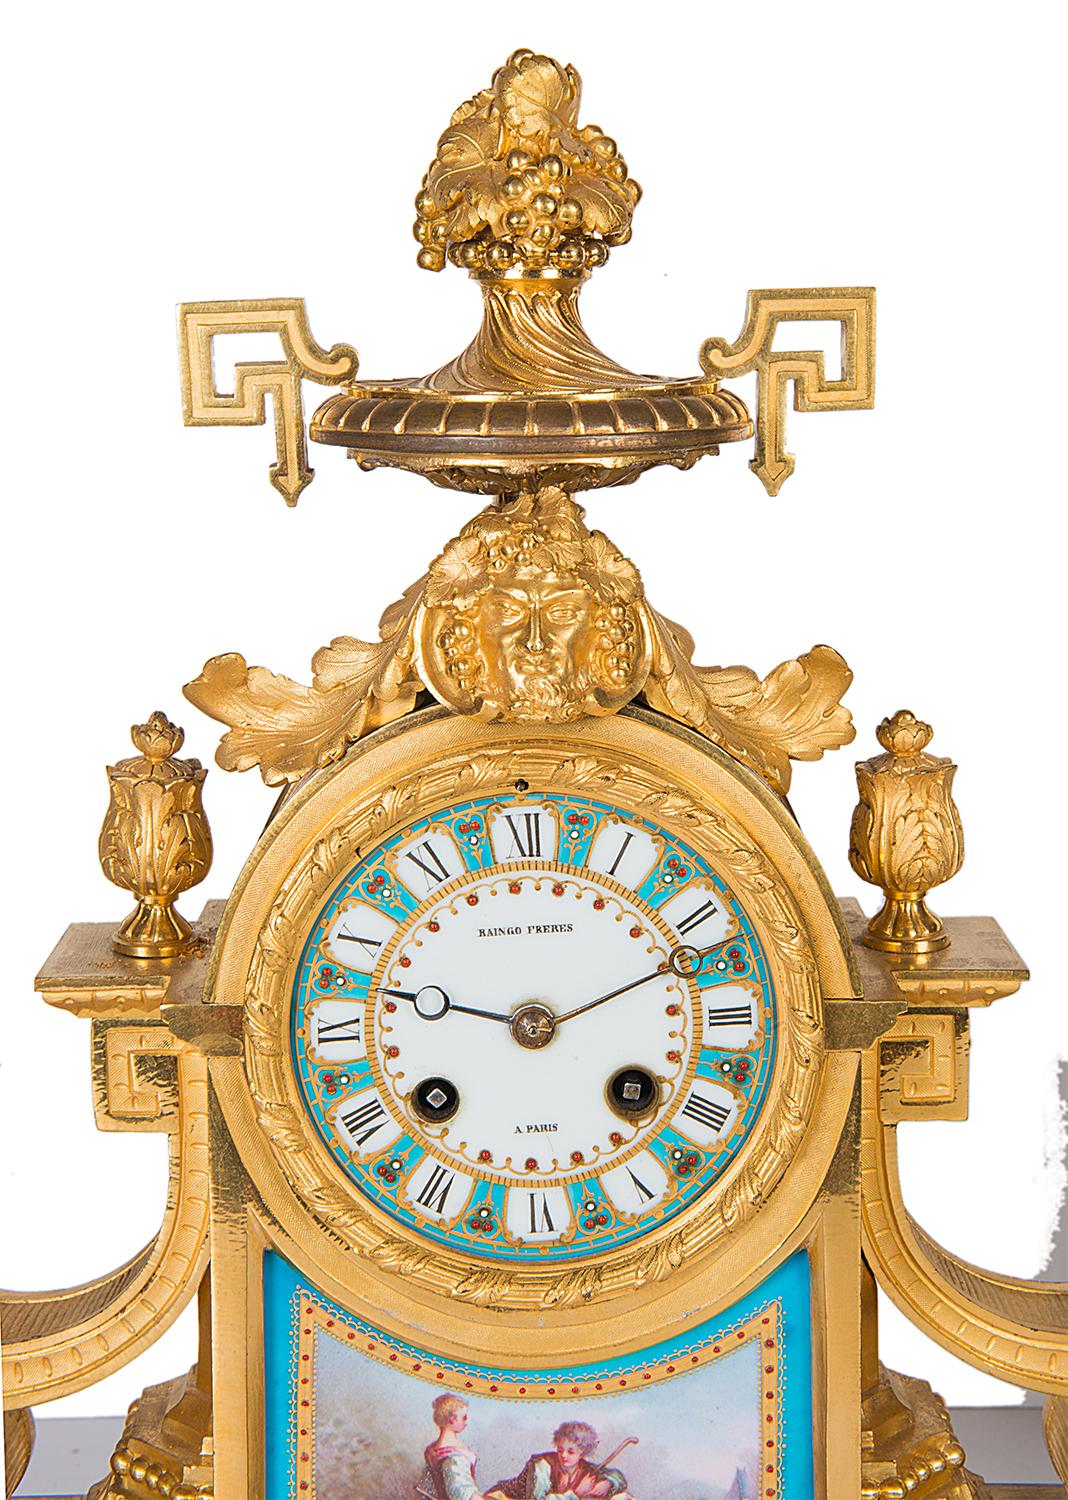 A good quality 19th century French gilded ormolu and Sevres style porcelain clock garniture. Having cherubs playing on either of the two branch candelabra. The clock with a two handled urn to the top, porcelain faced eight day chiming clock,